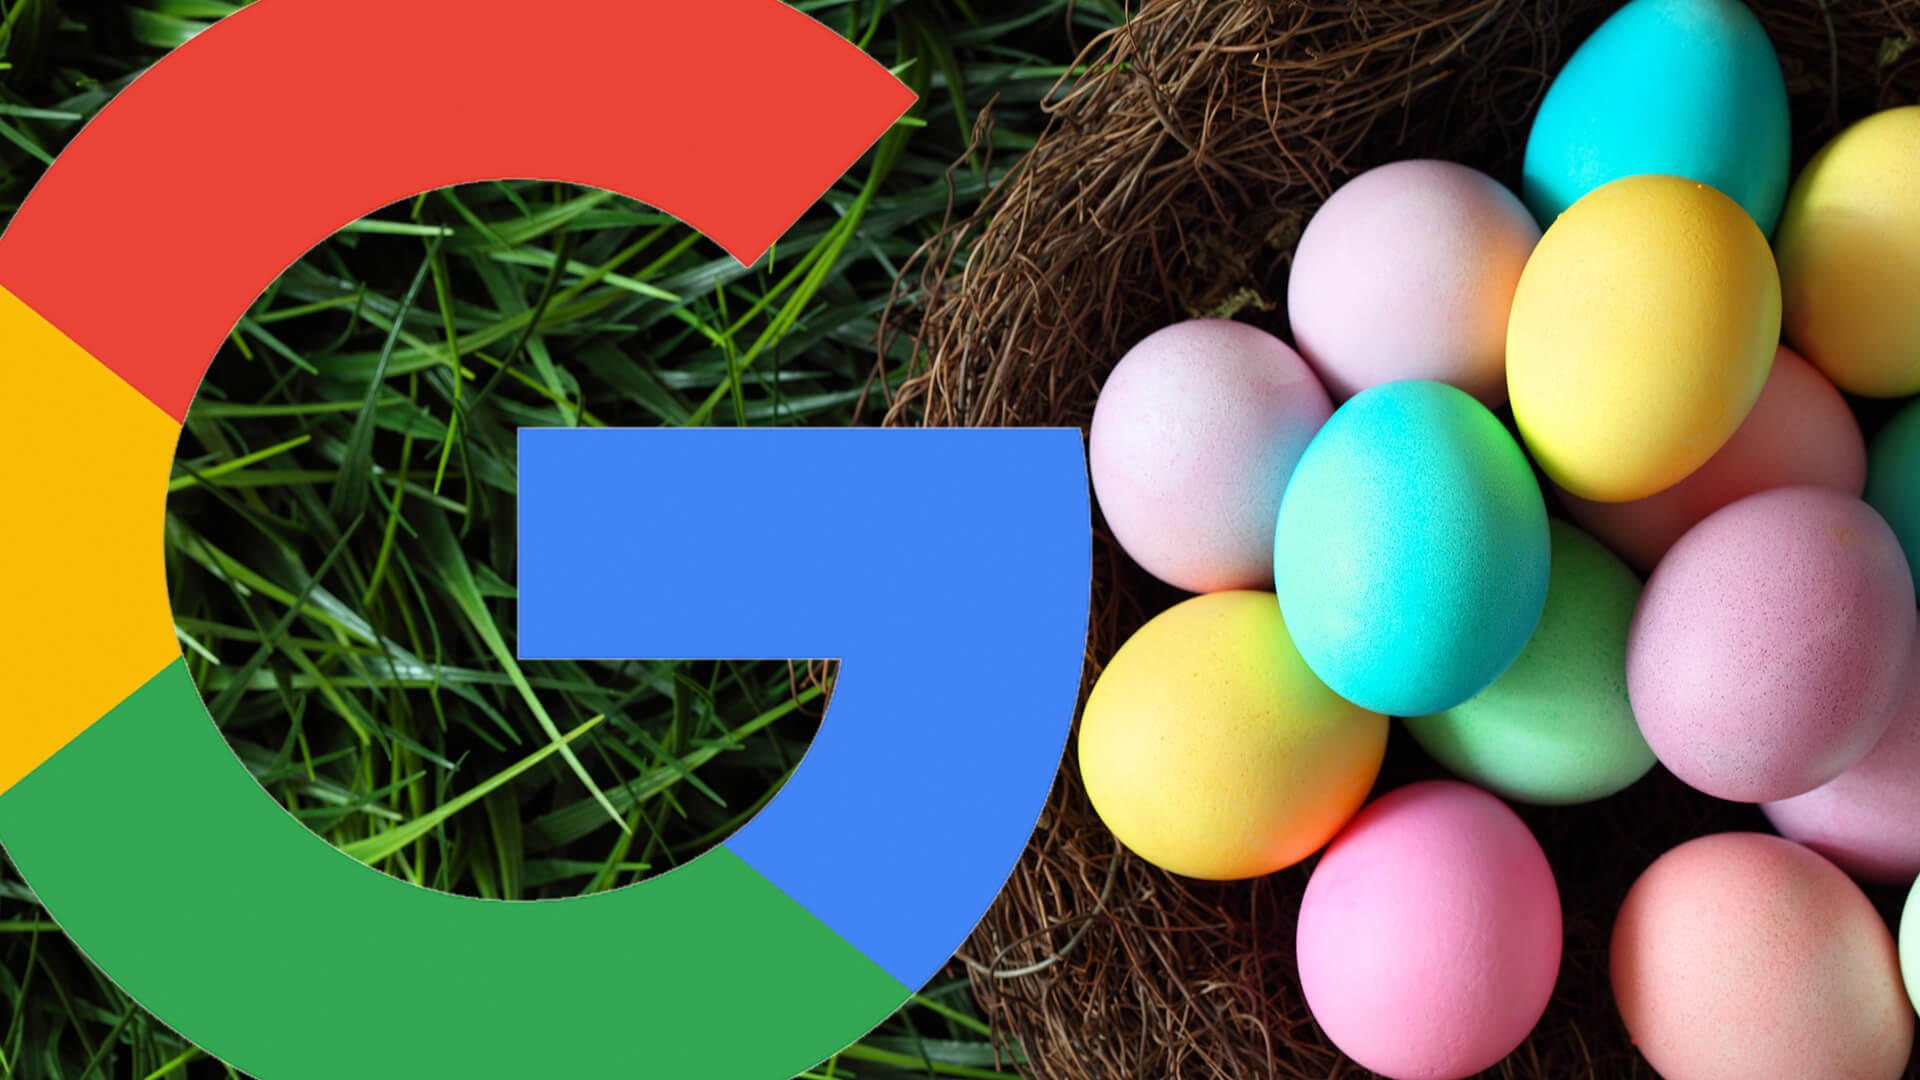 How To Find & Play Snake Easter Egg On Google Maps